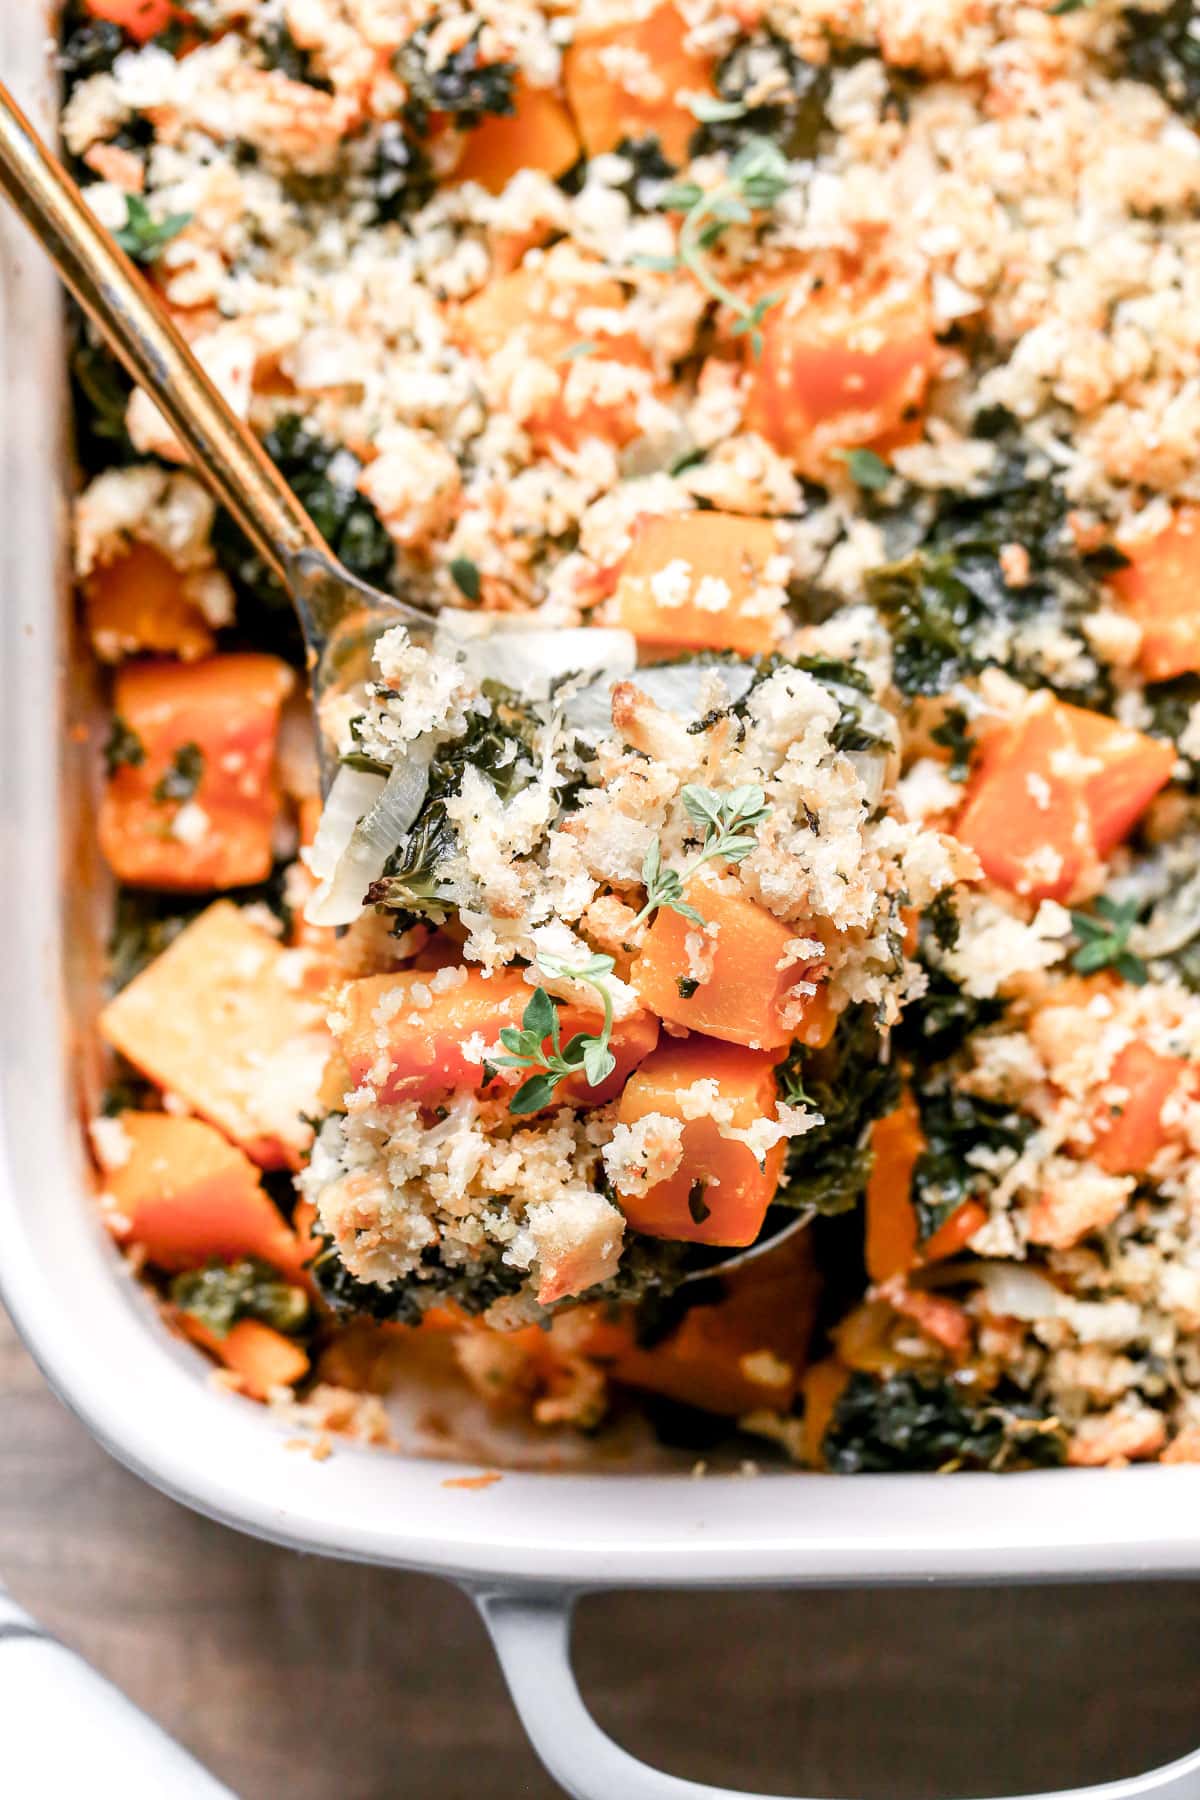 A casserole dish with a butternut squash casserole topped with breadcrumbs.